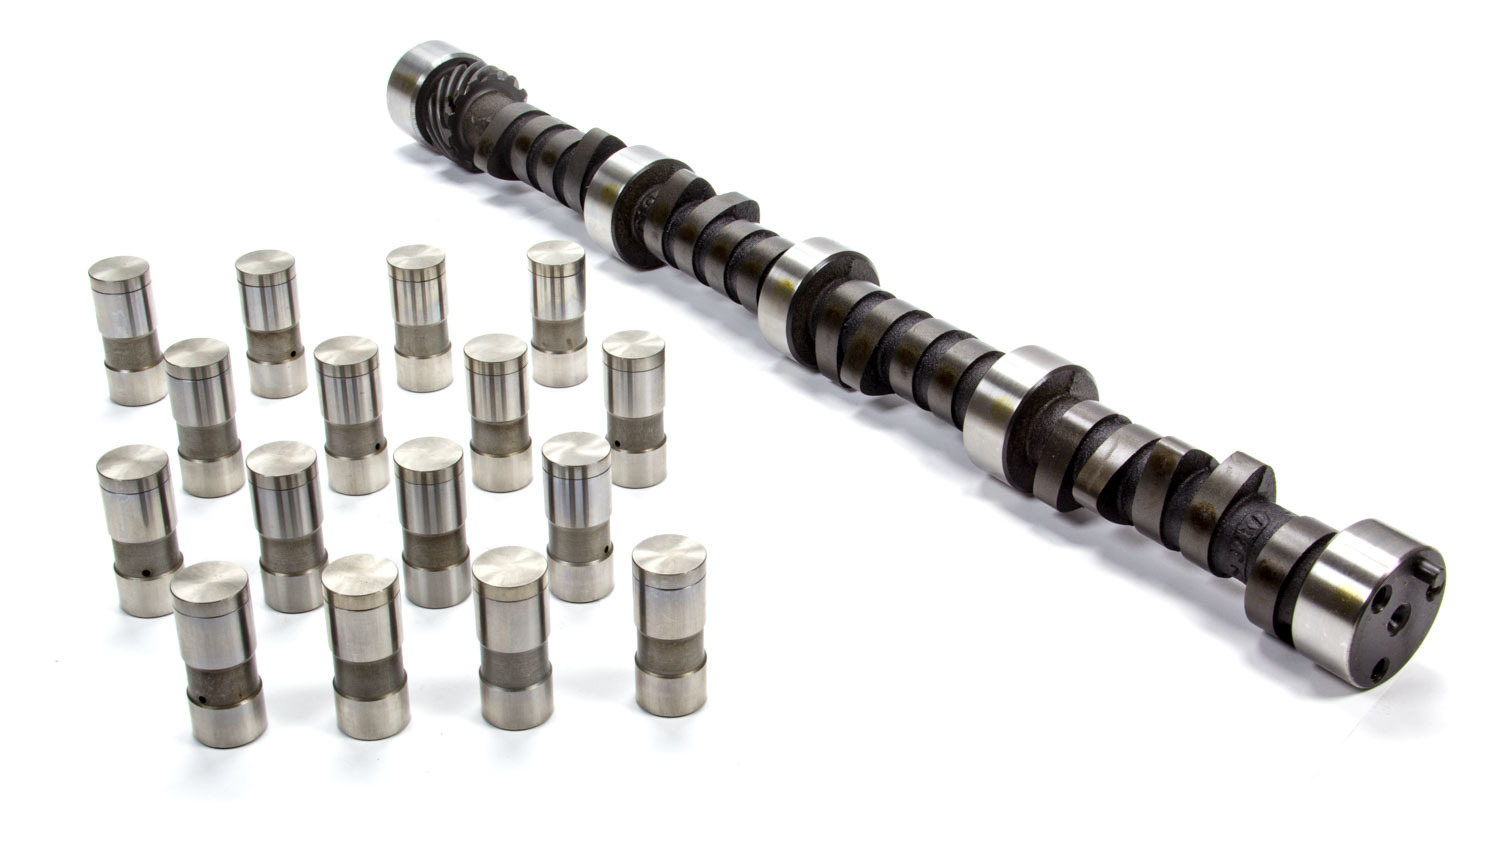 Elgin CL-1065PK Camshaft / Lifters, Street Performance, Hydraulic Flat Tappet, Lift 0.458 / 0.458 in, Duration 284 / 284, 115 LSA, 2000 / 4800 RPM, Small Block Chevy, Kit